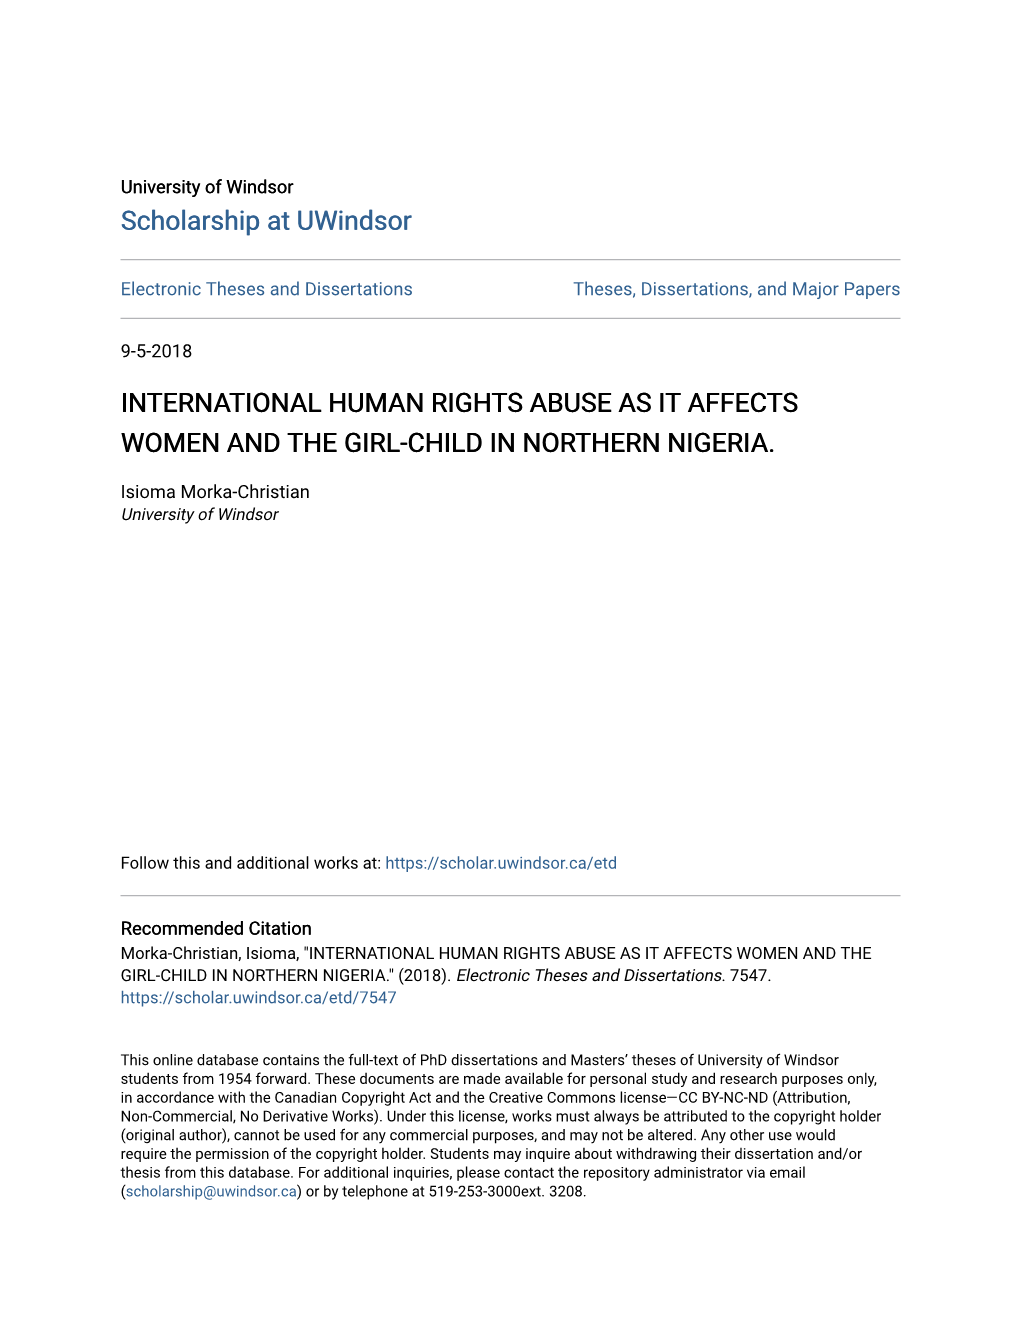 International Human Rights Abuse As It Affects Women and the Girl-Child in Northern Nigeria